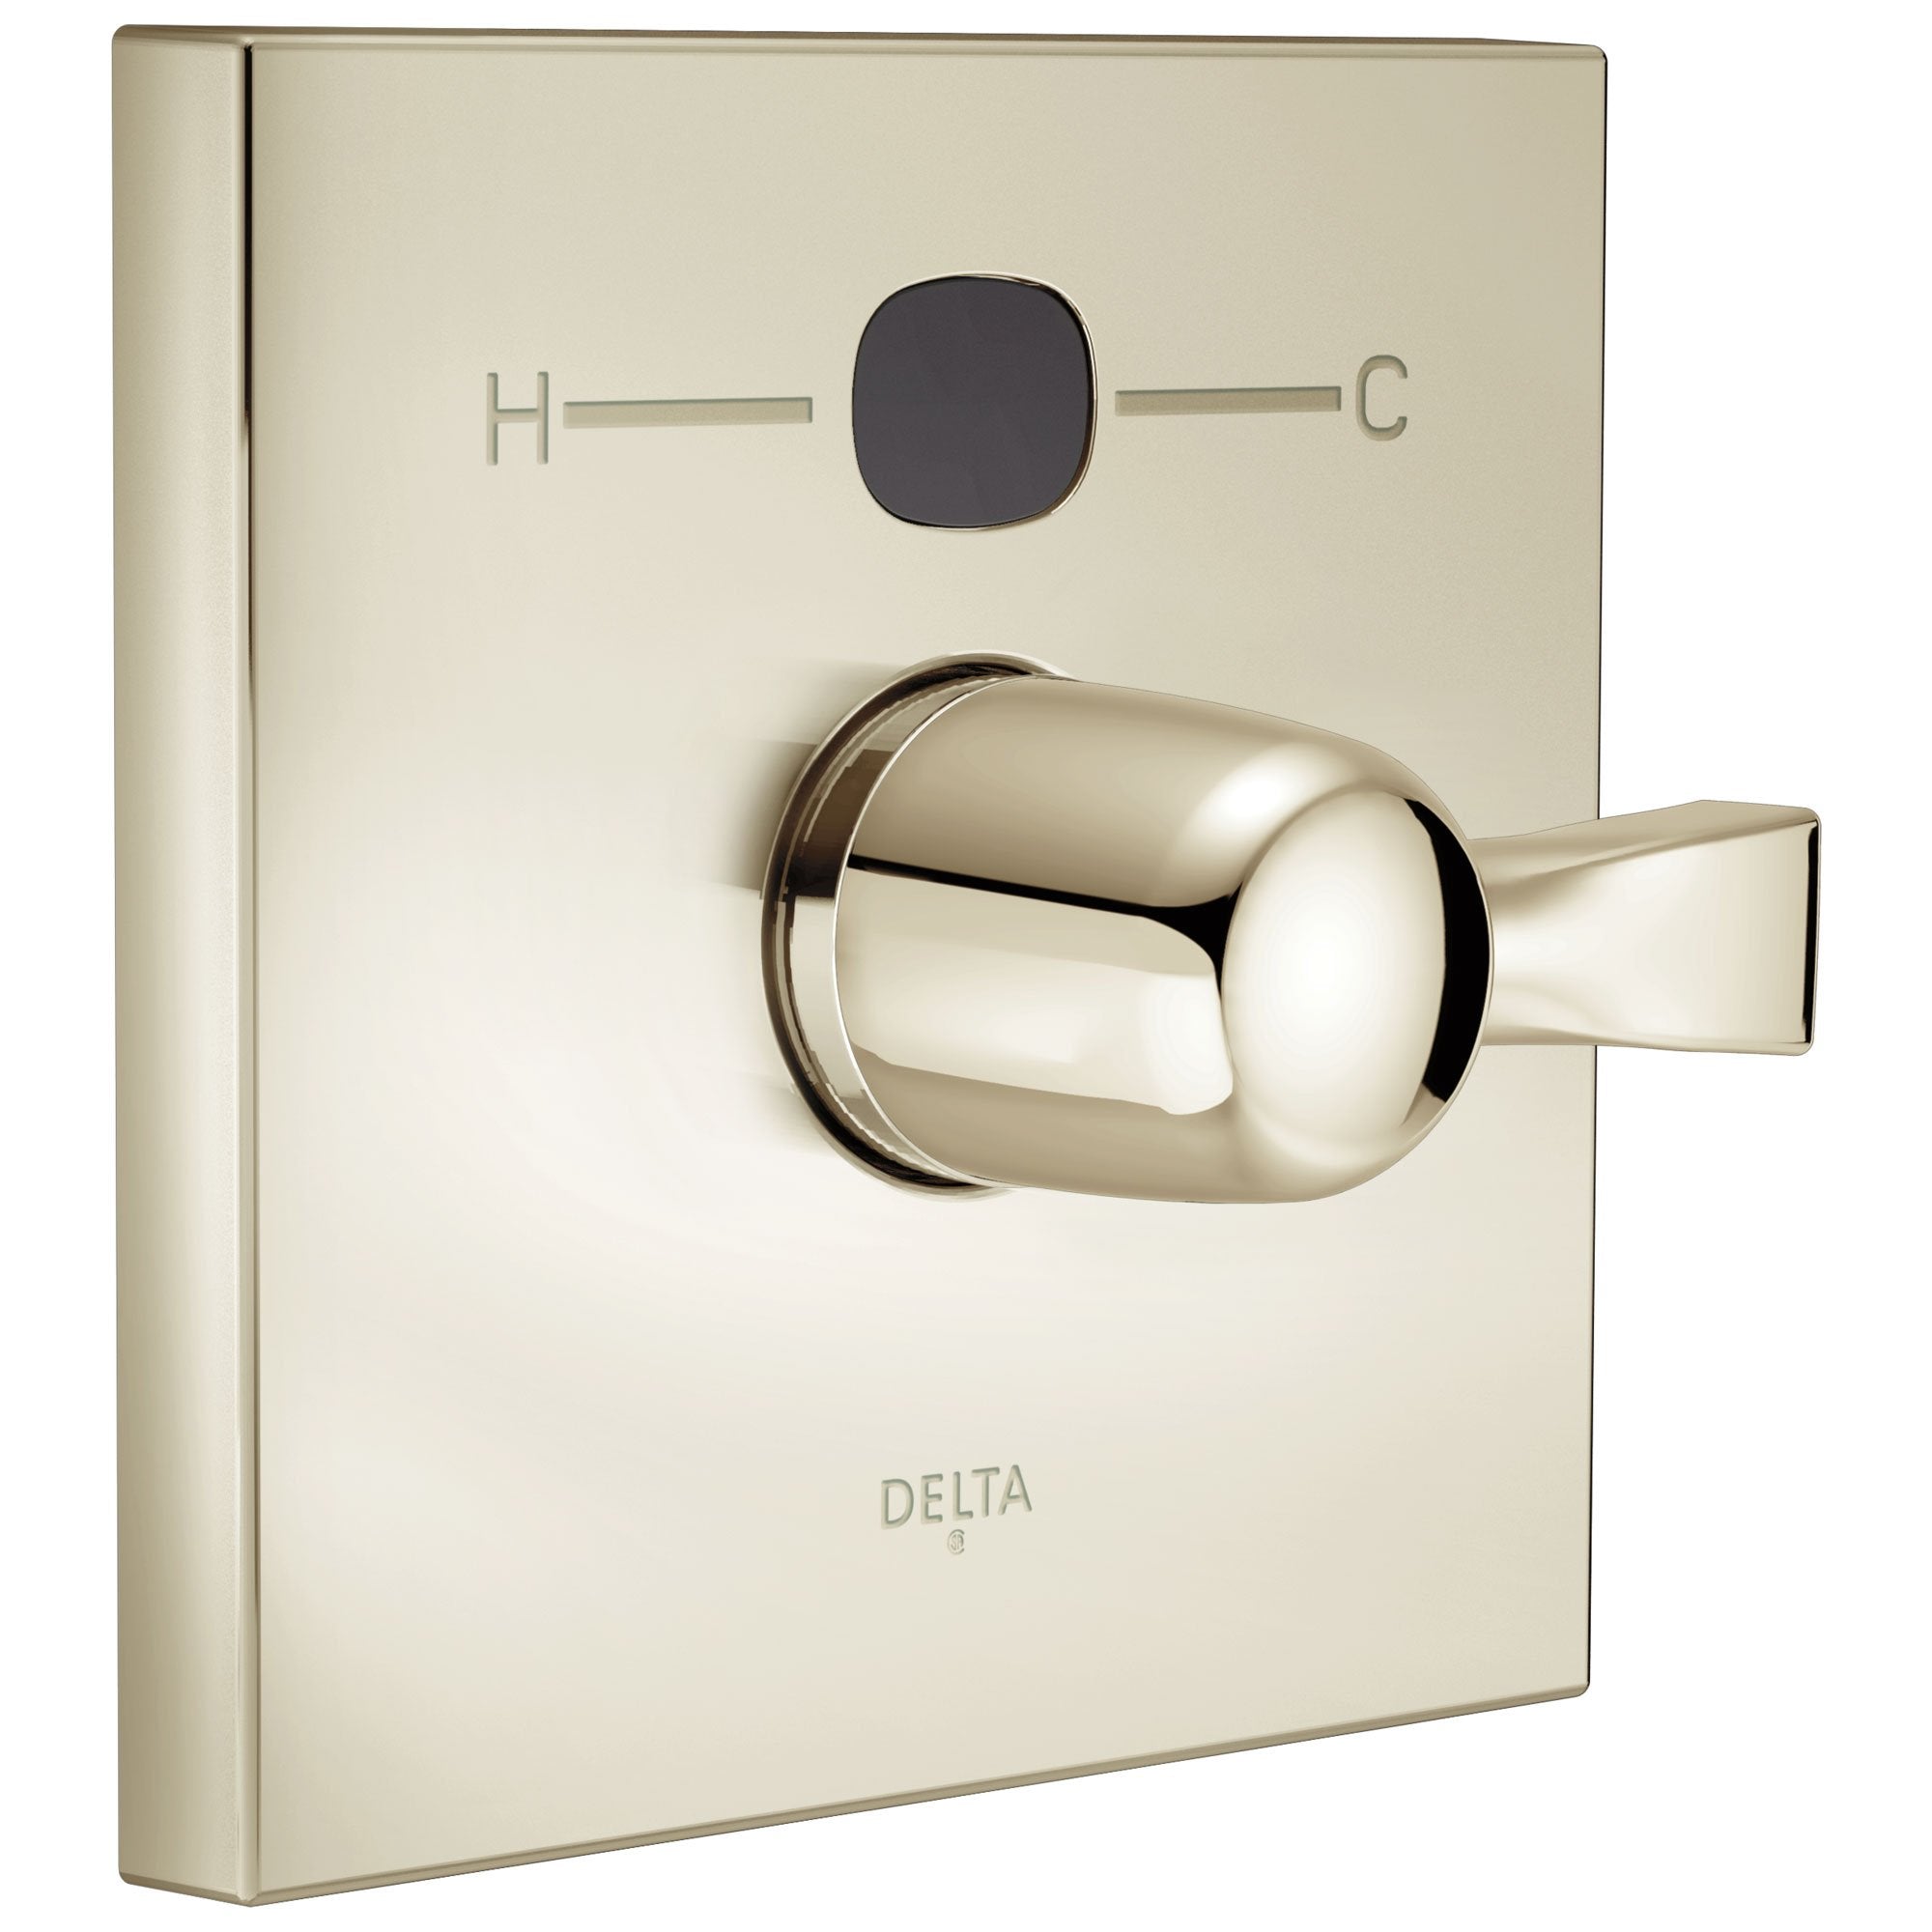 Delta Polished Nickel Dryden 14 Series Temp2O Square Electronic Shower Faucet Valve Only Control INCLUDES Single Lever Handle and Valve without Stops D1880V